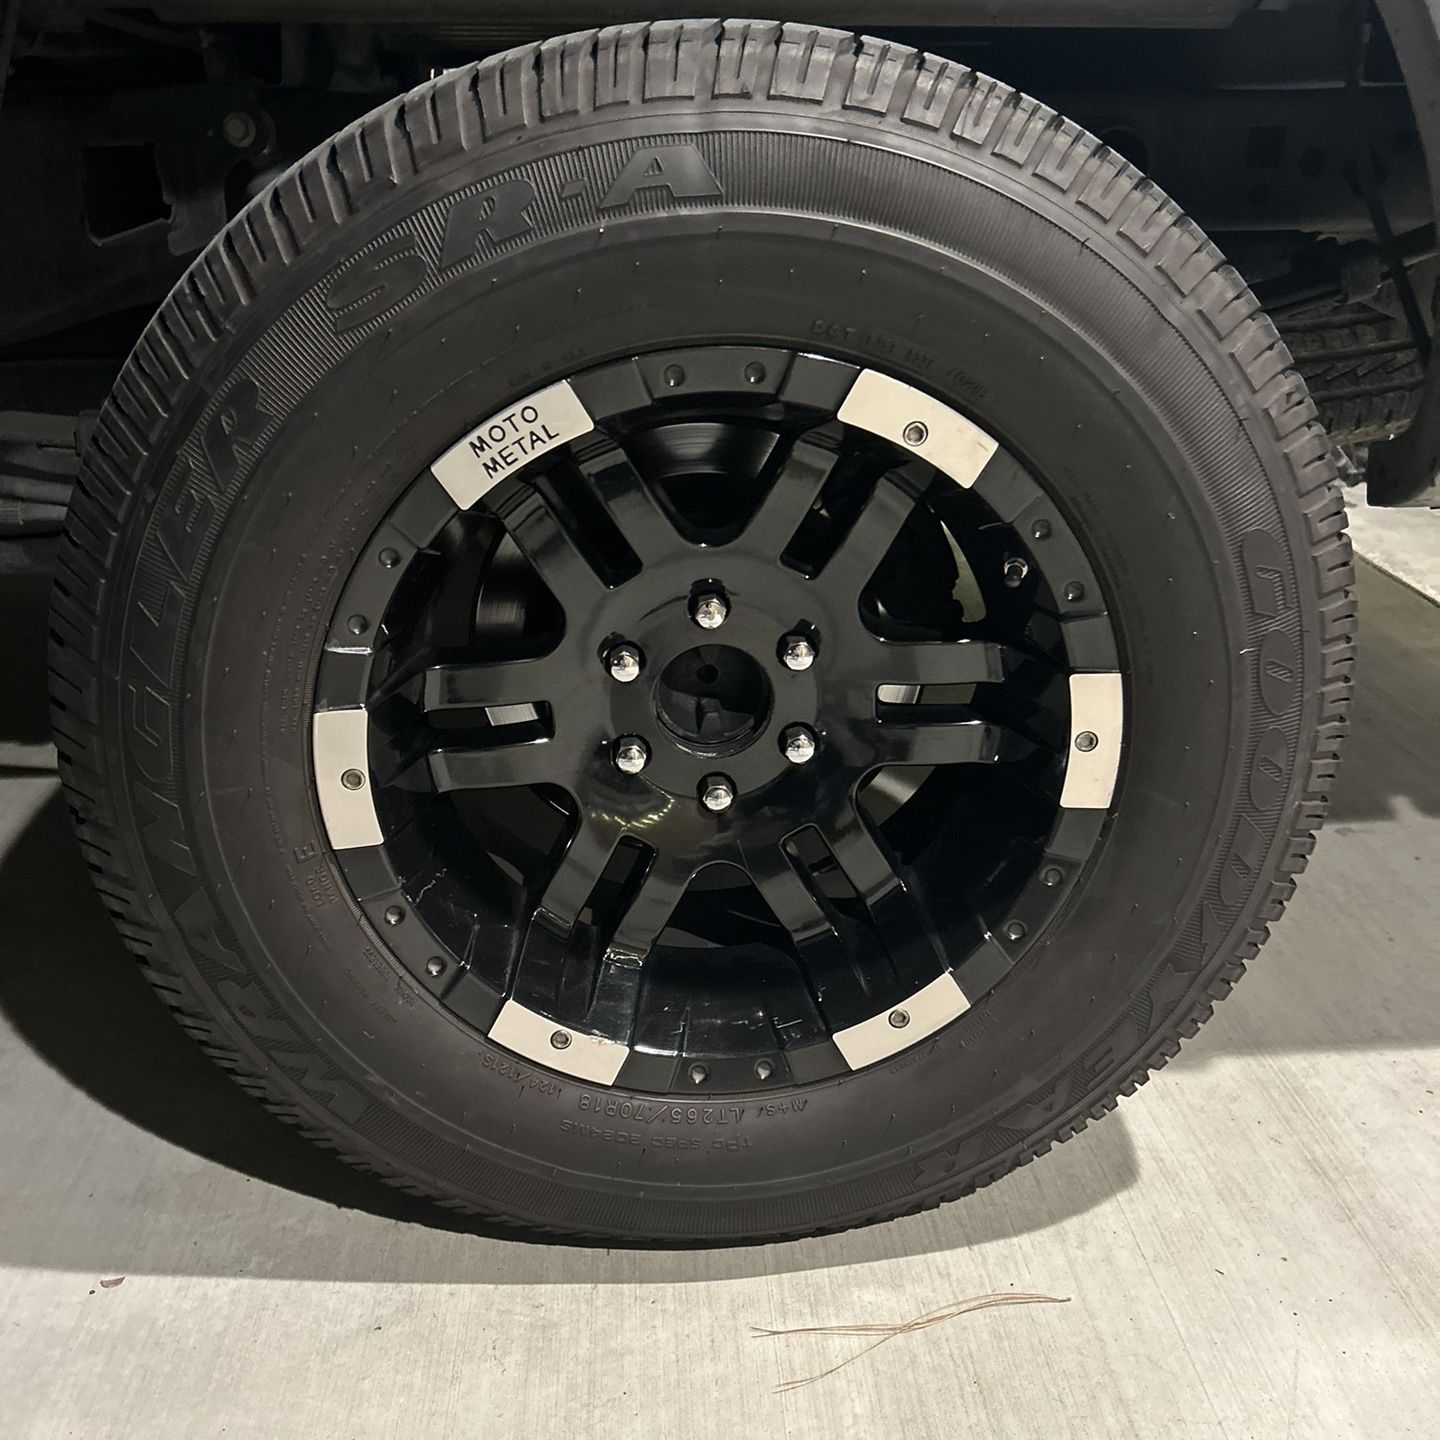 LT 265/70 R18 Goodyear wrangler SR-A (33”) Wheels Are 6 X 135 Bolt Pattern  for Sale in Lake Forest, CA - OfferUp